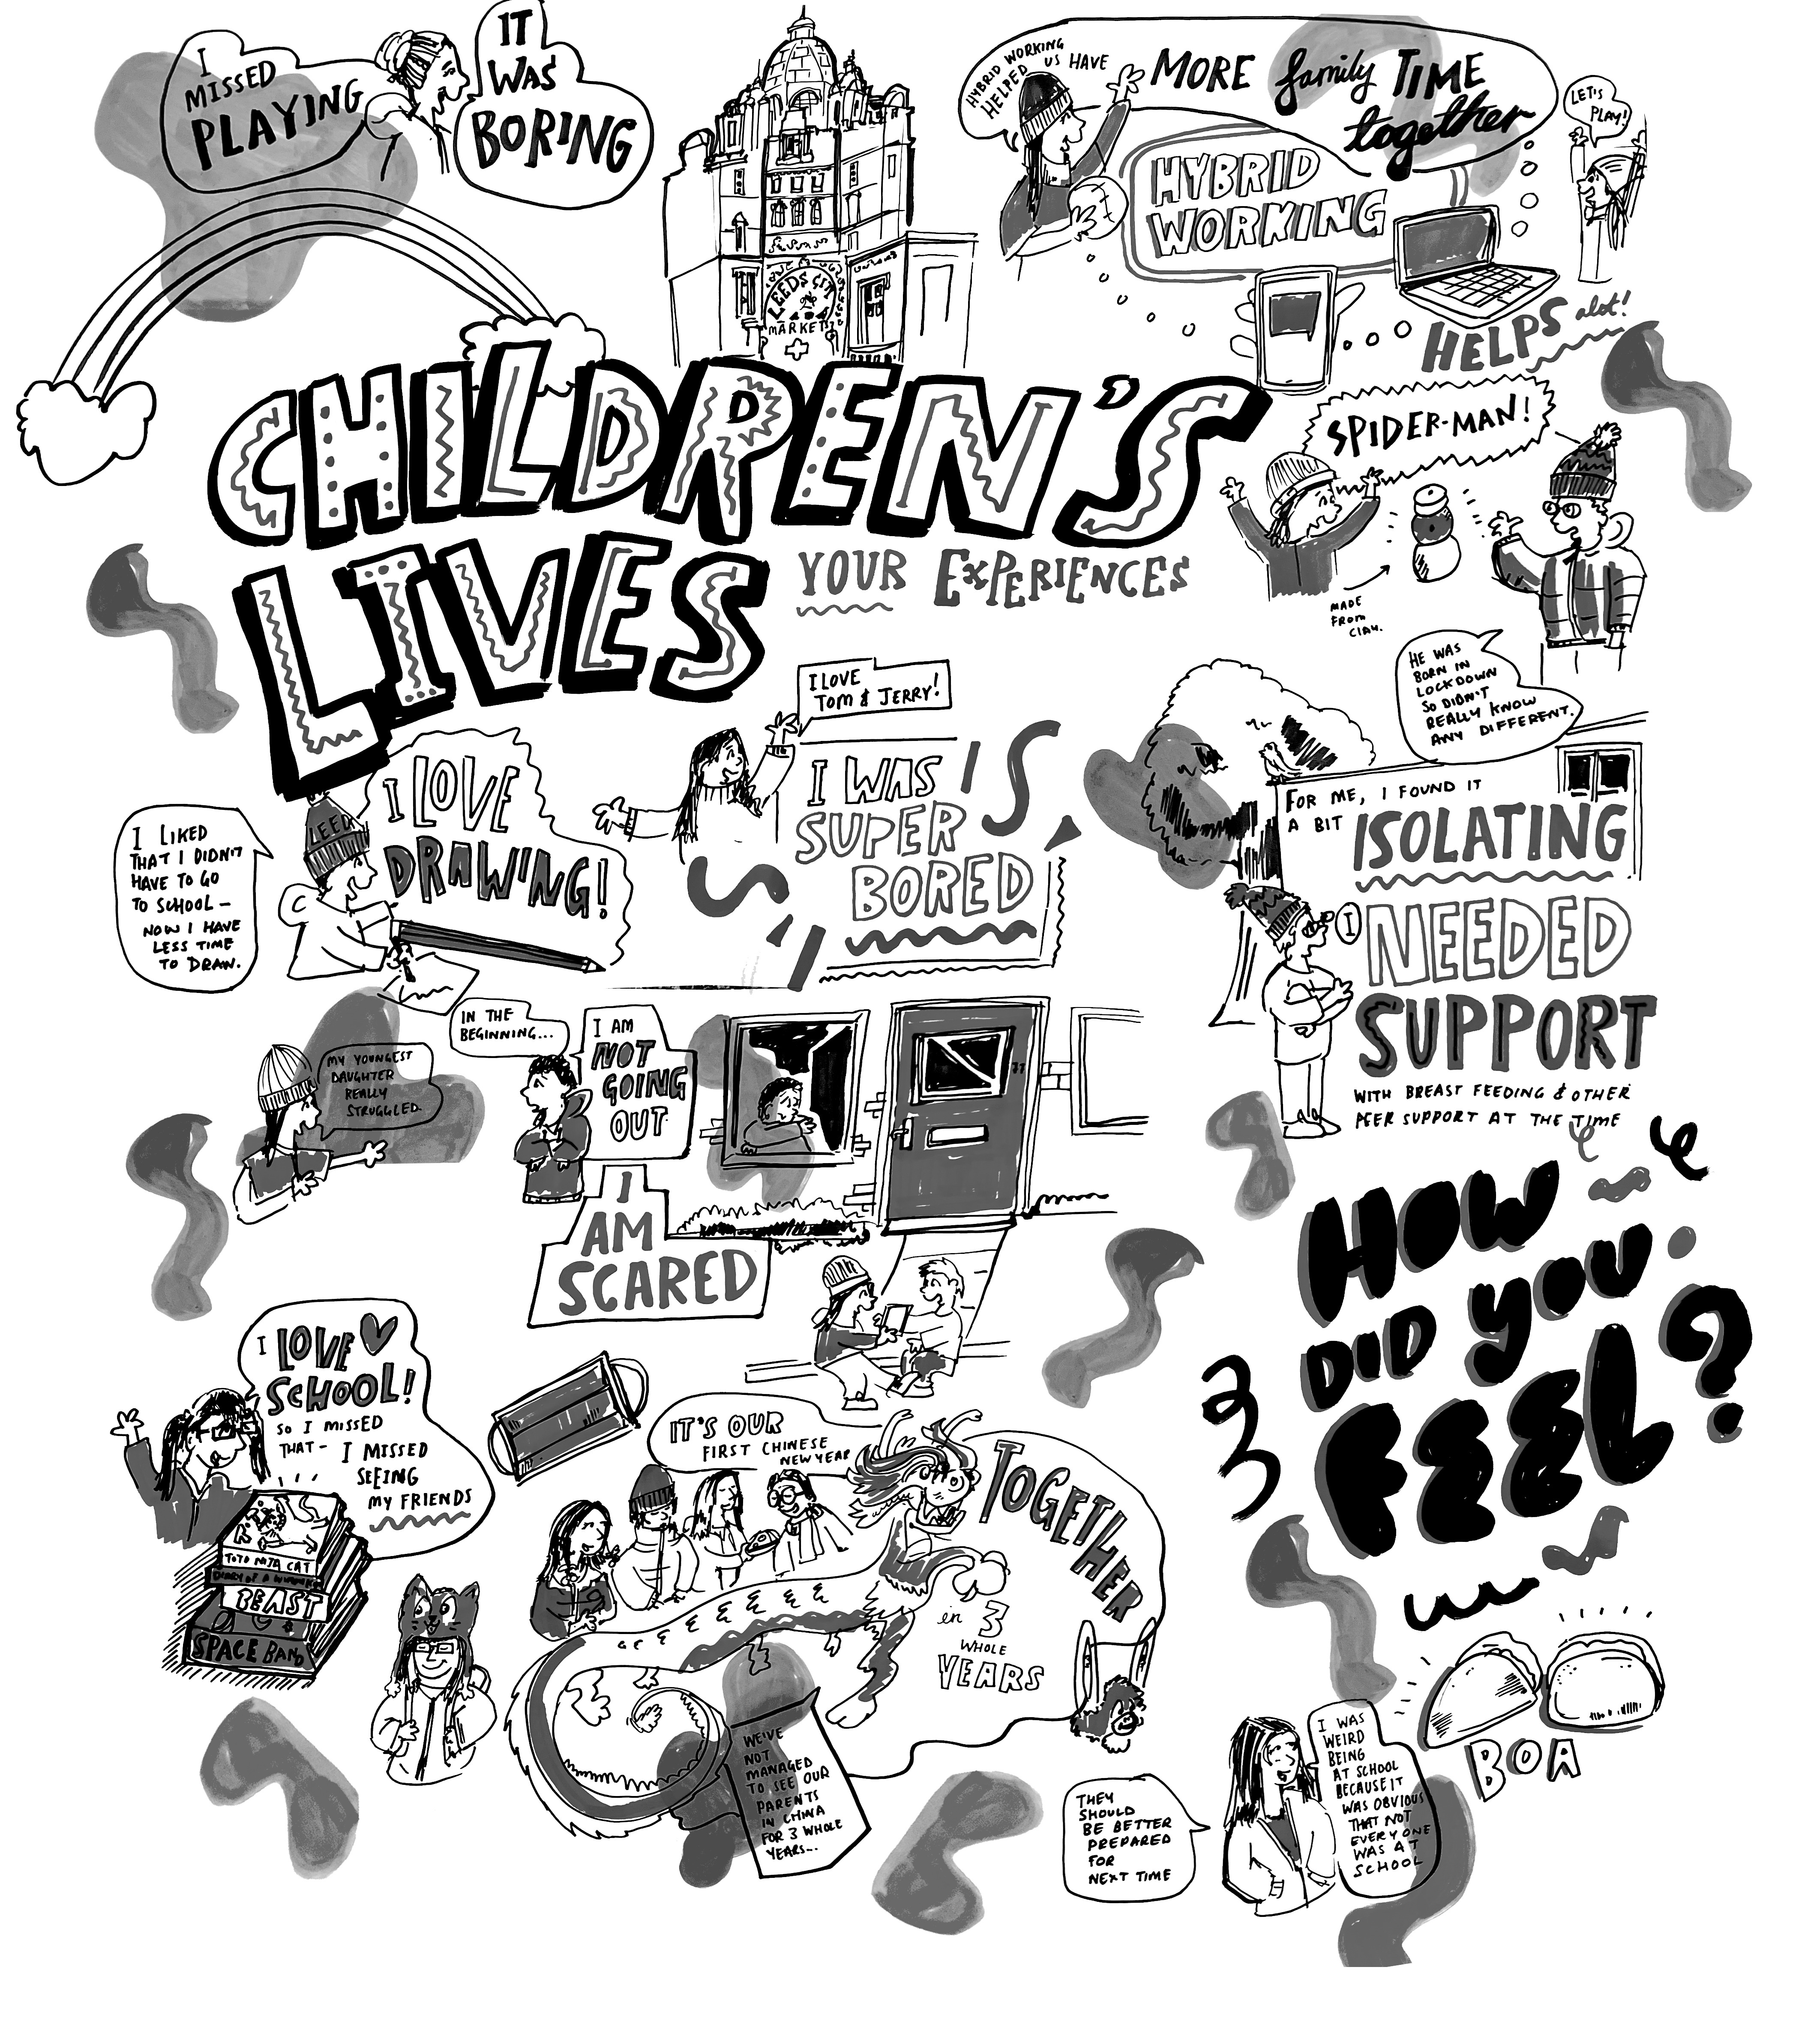 Creation Station Engagement - Children’s Lives drawing